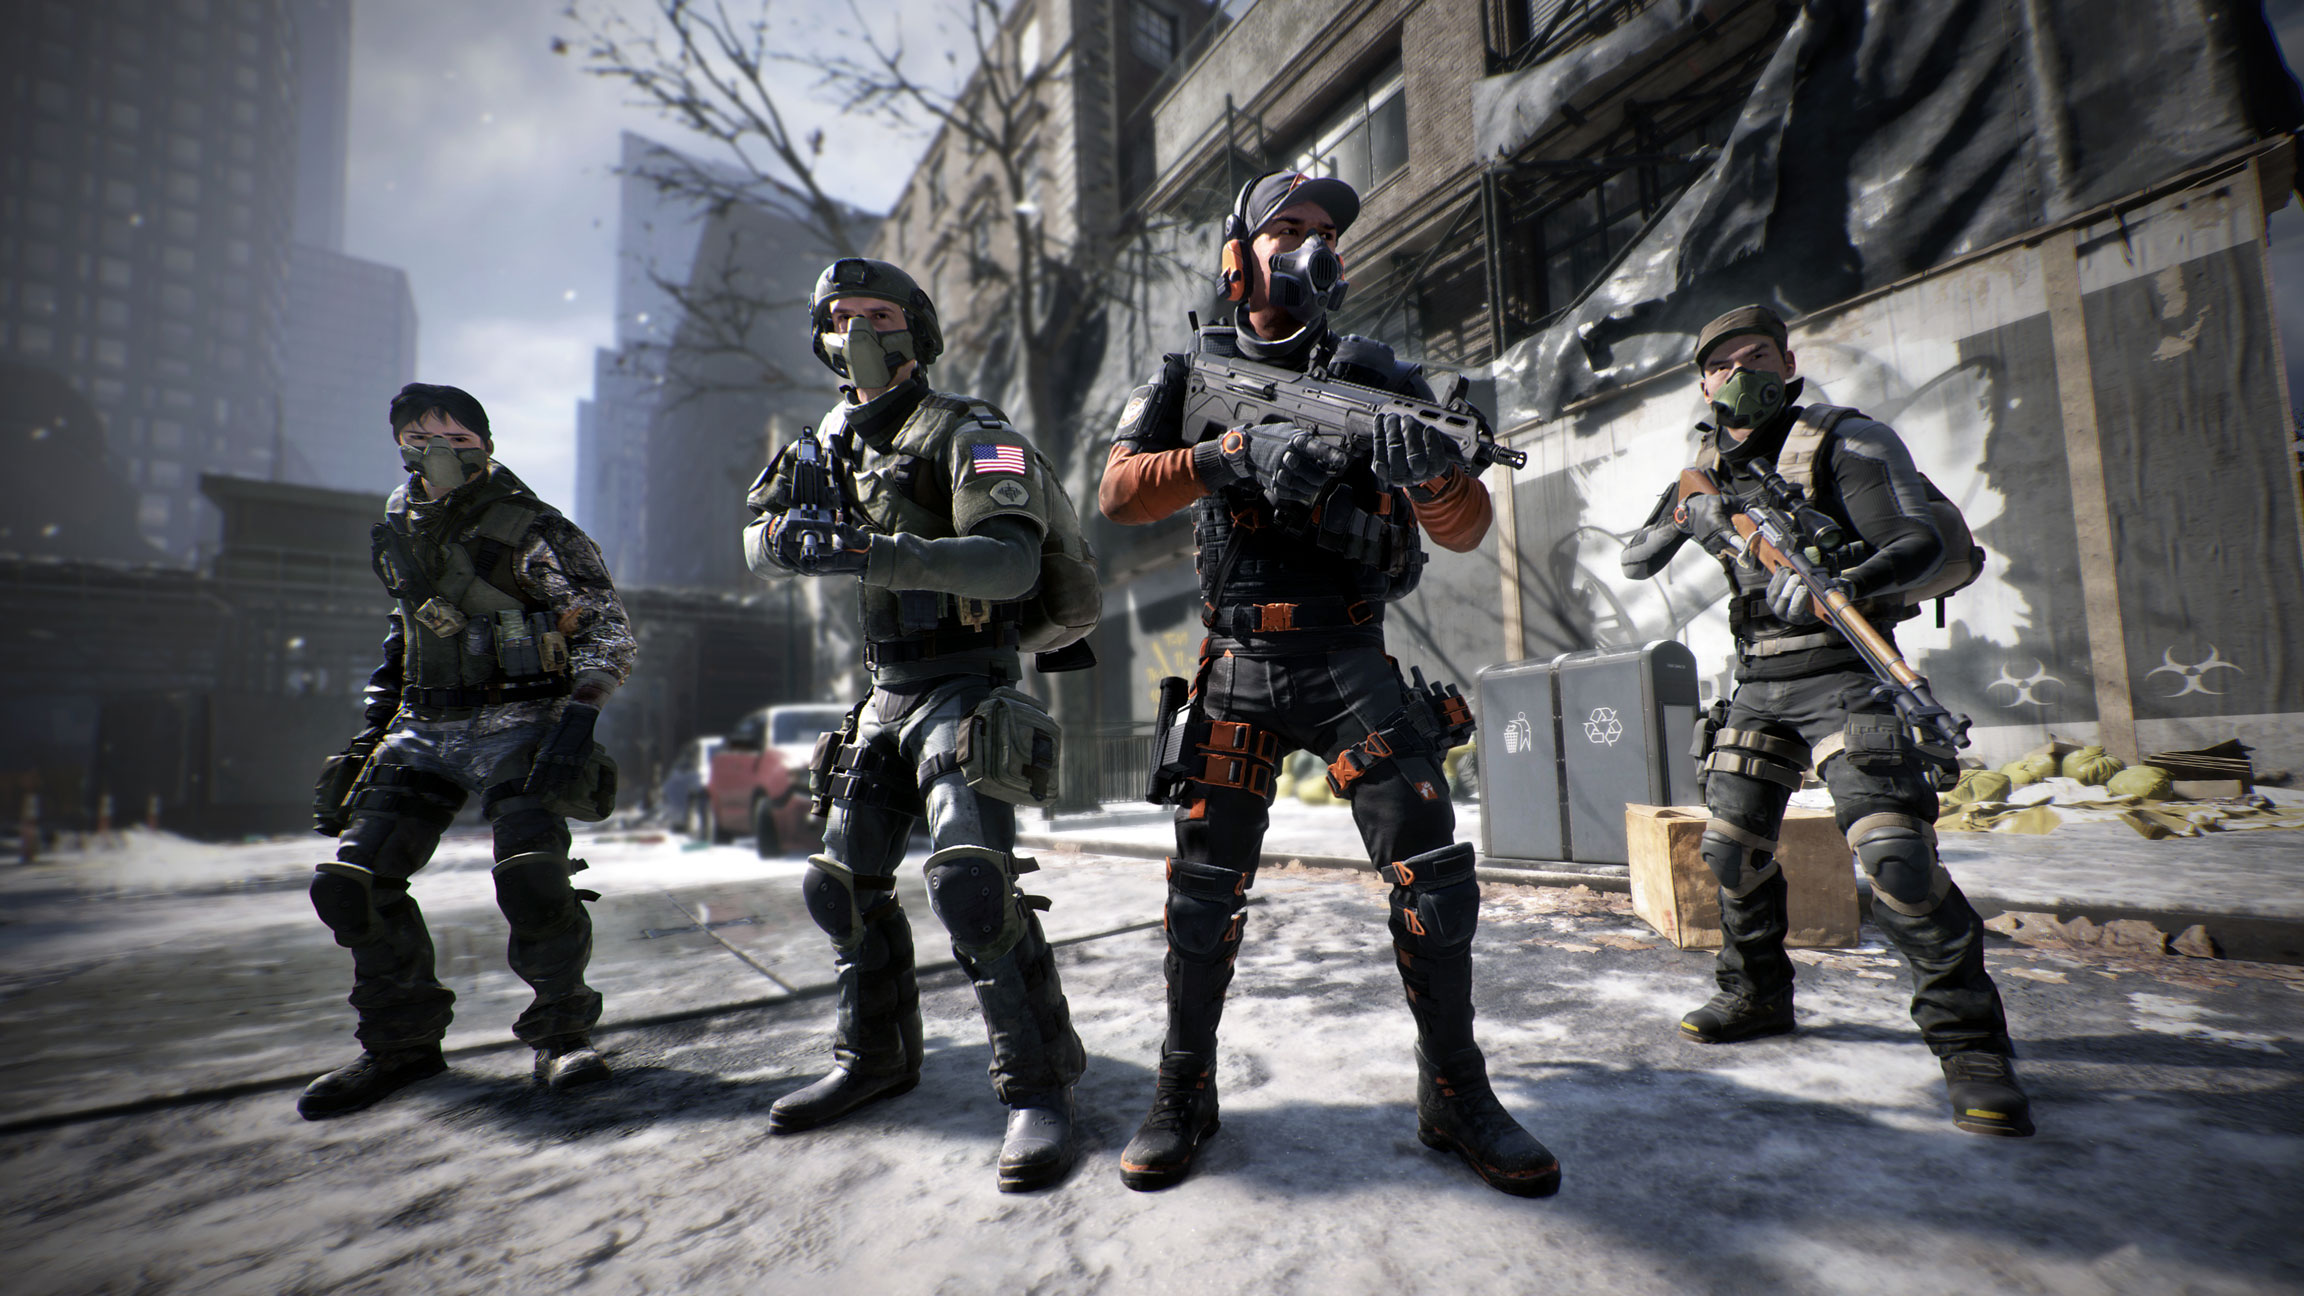 The Division 1.8 update is coming next week